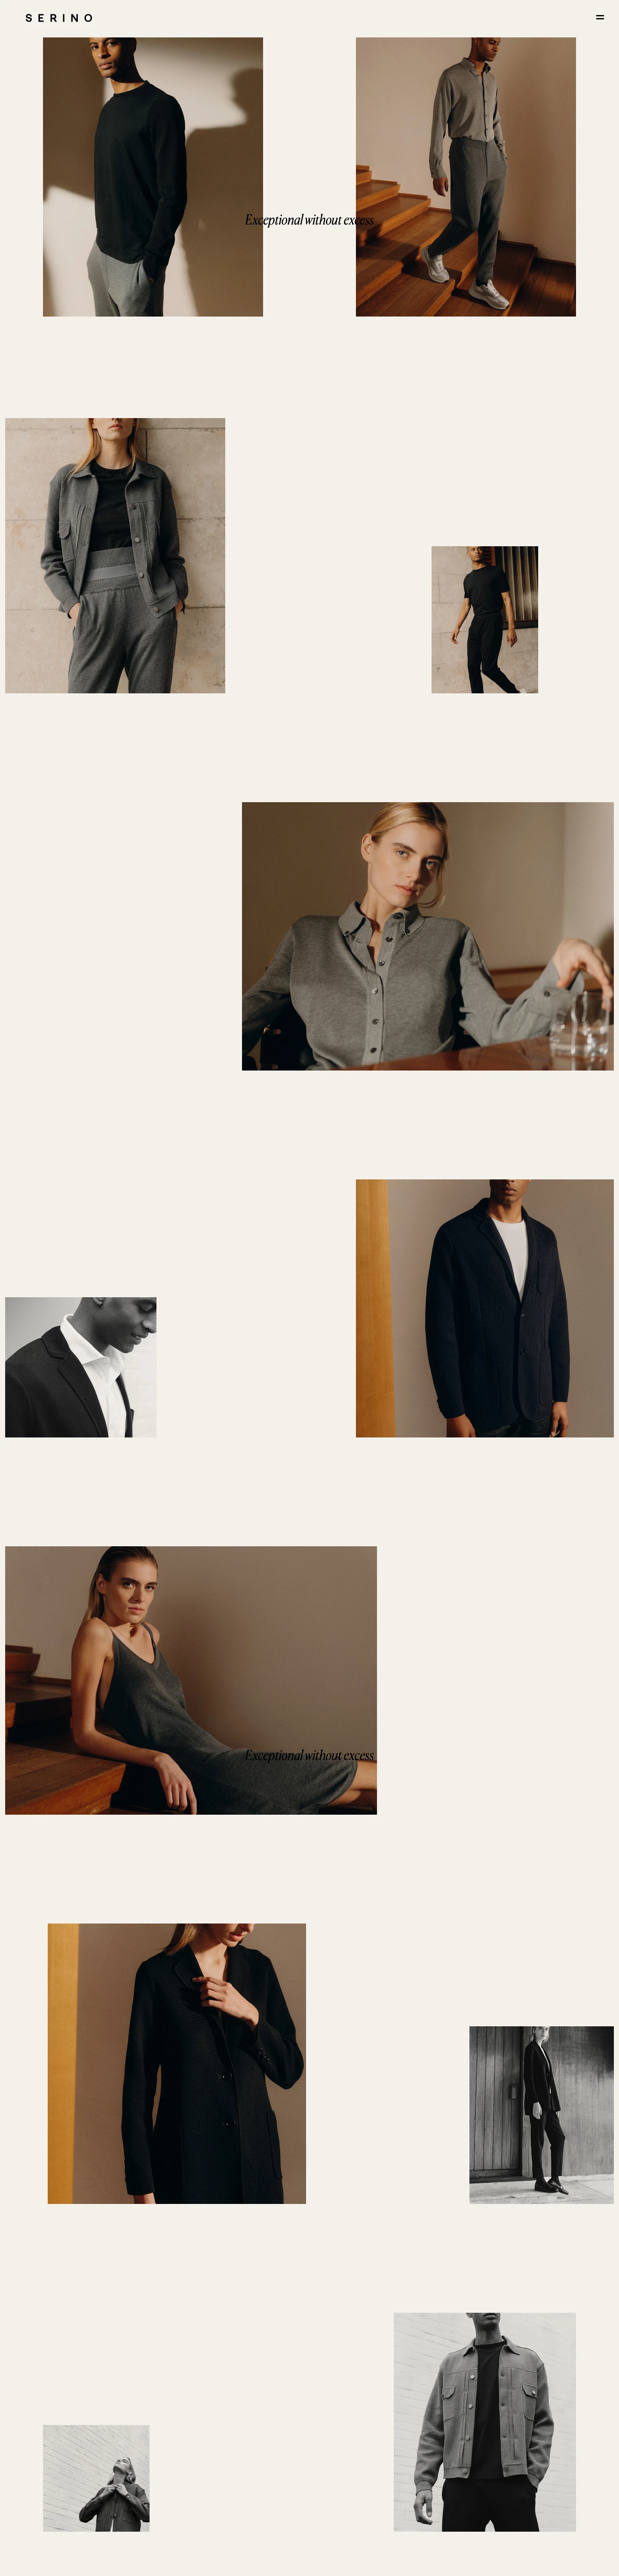 Serino Landing Page Example: Serino creates clothing essentials that epitomize how simplicity endures over time, and how it impacts our lives.